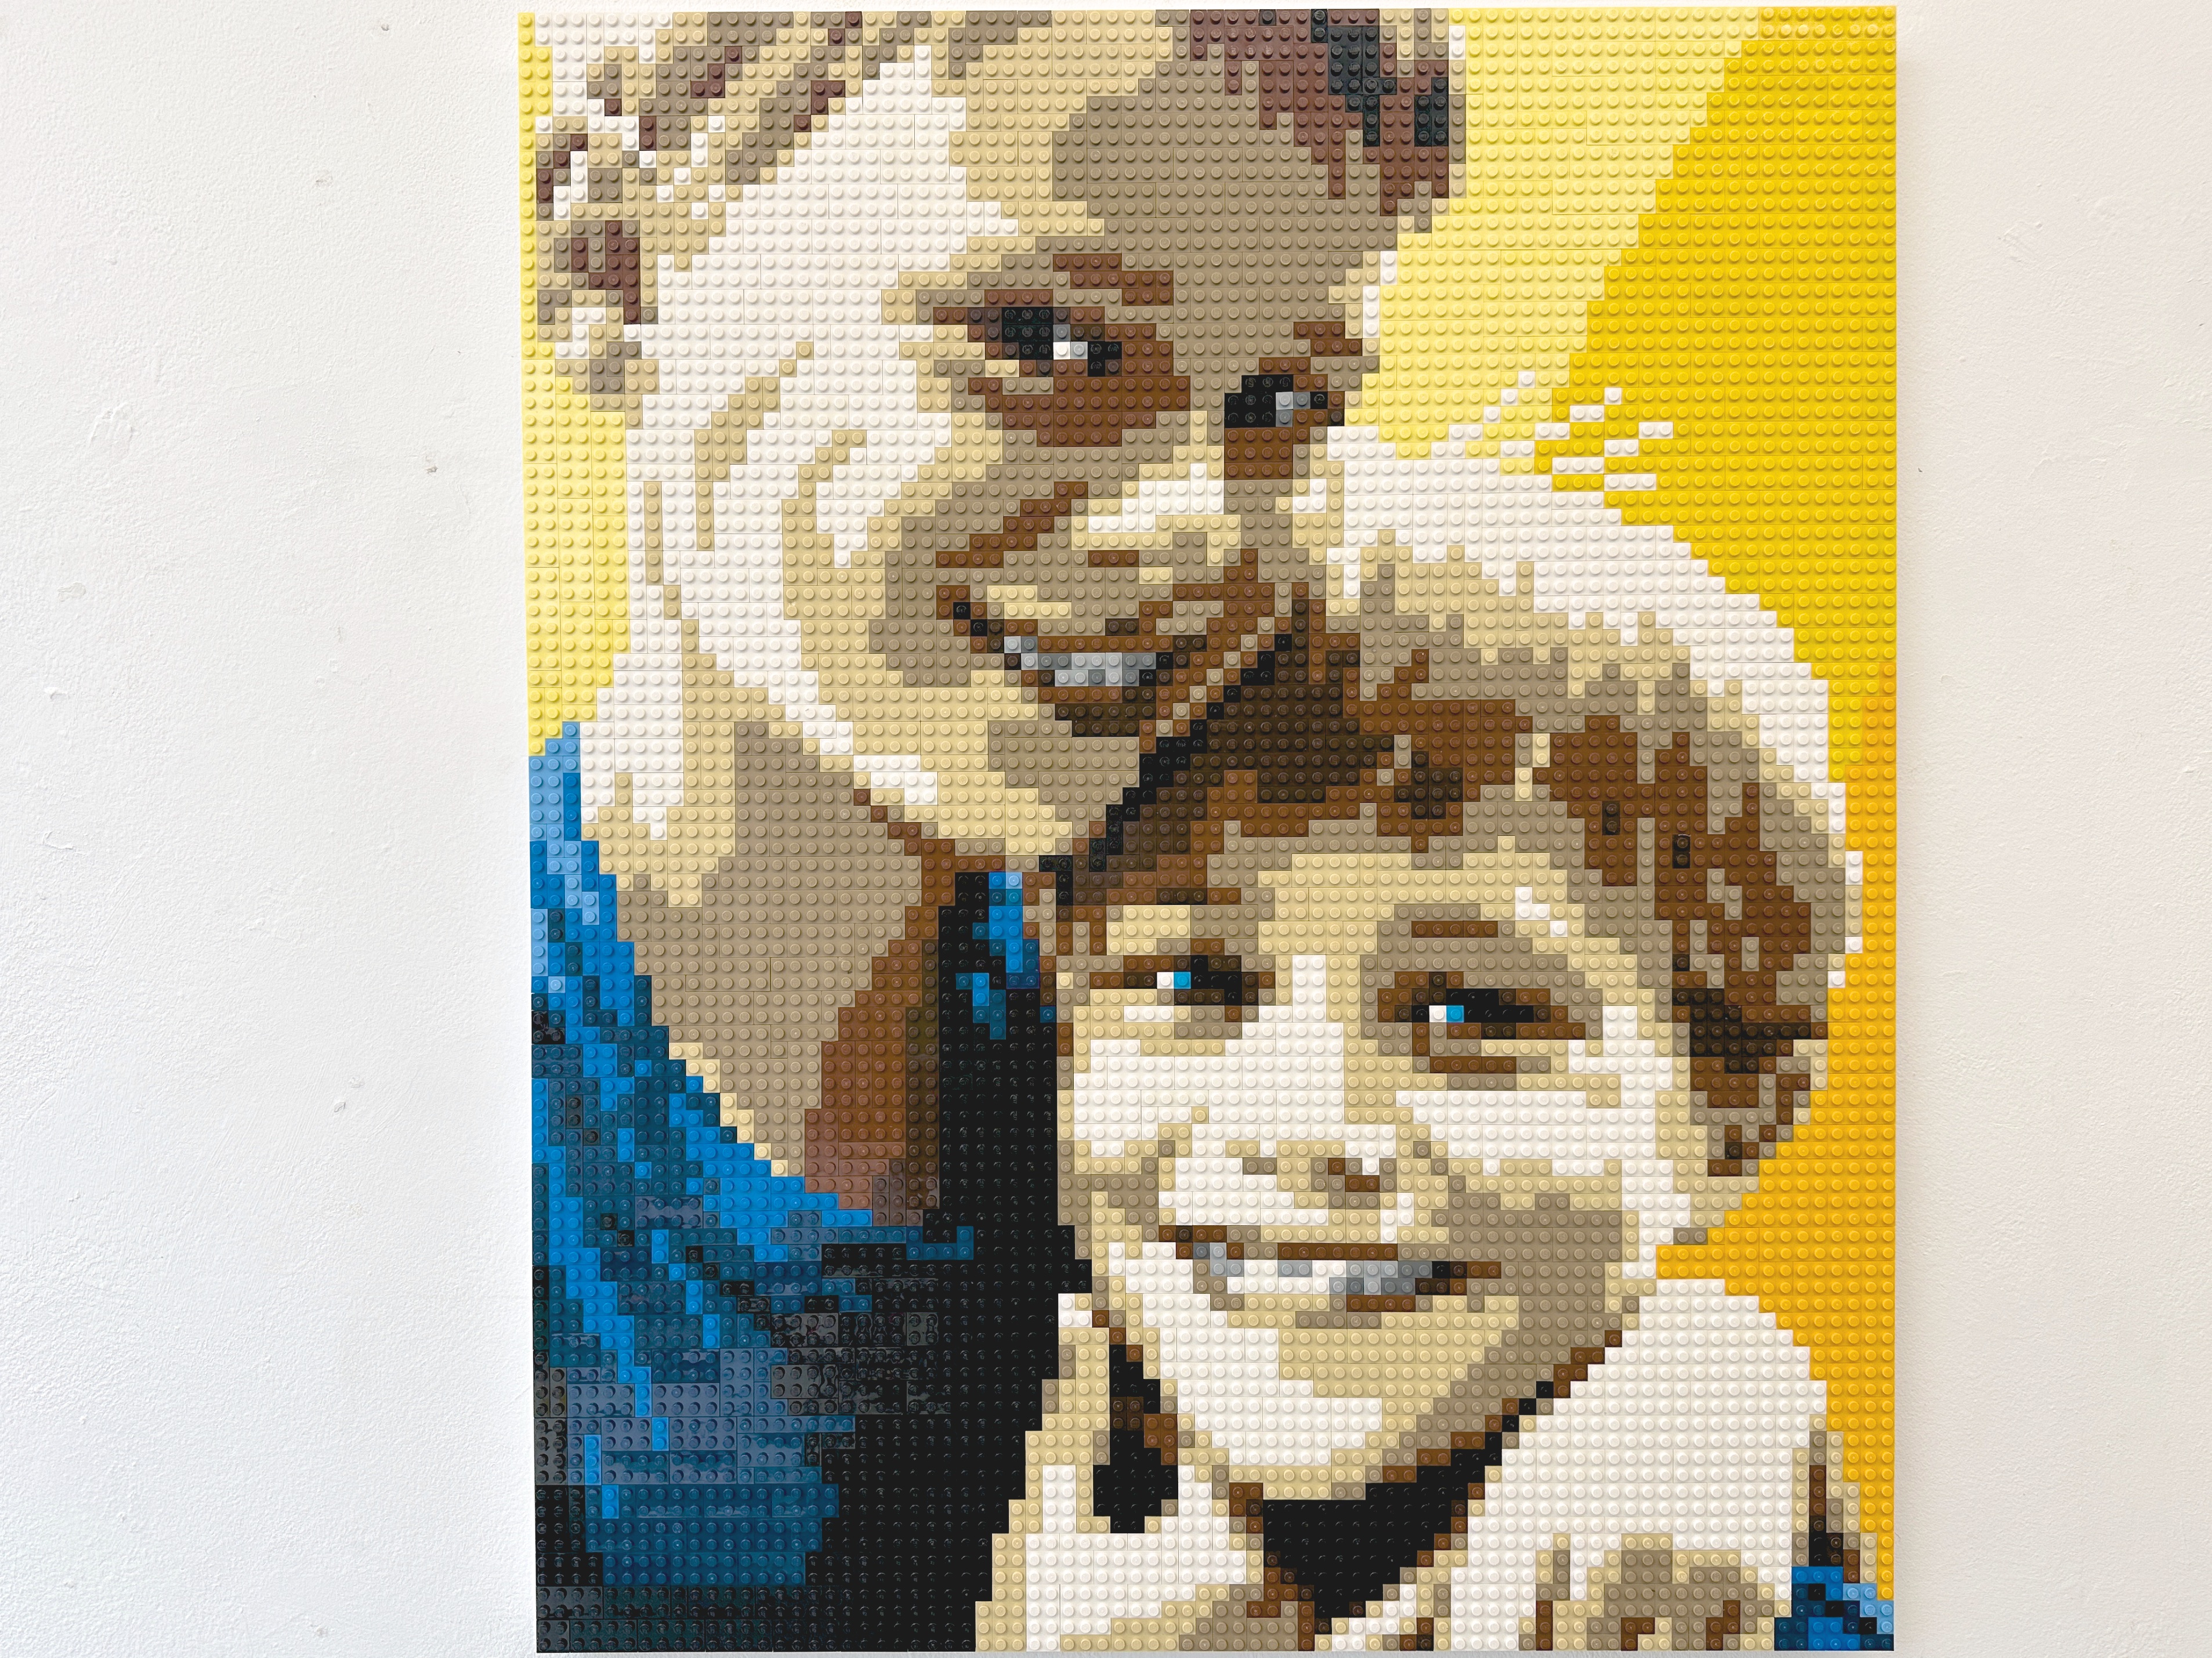 Brotherly-love-2 LEGO art by Sean Kenney